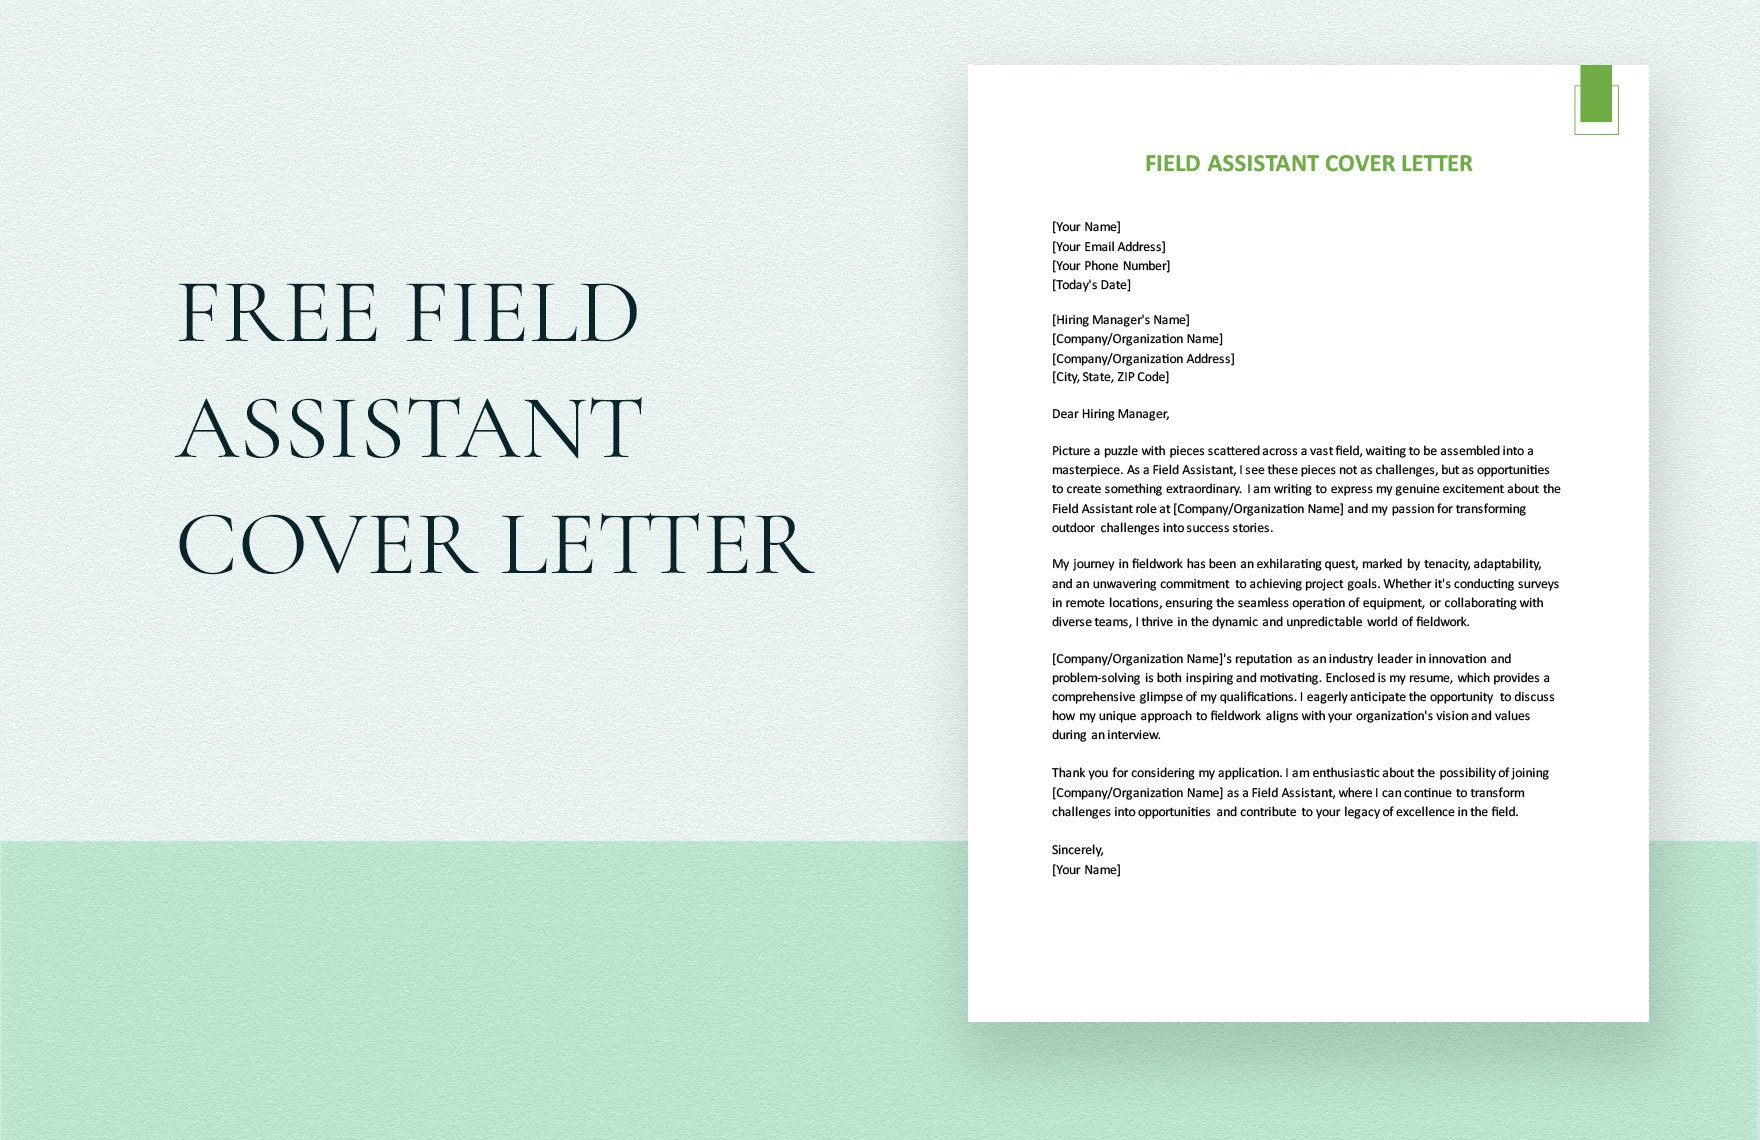 Field Assistant Cover Letter